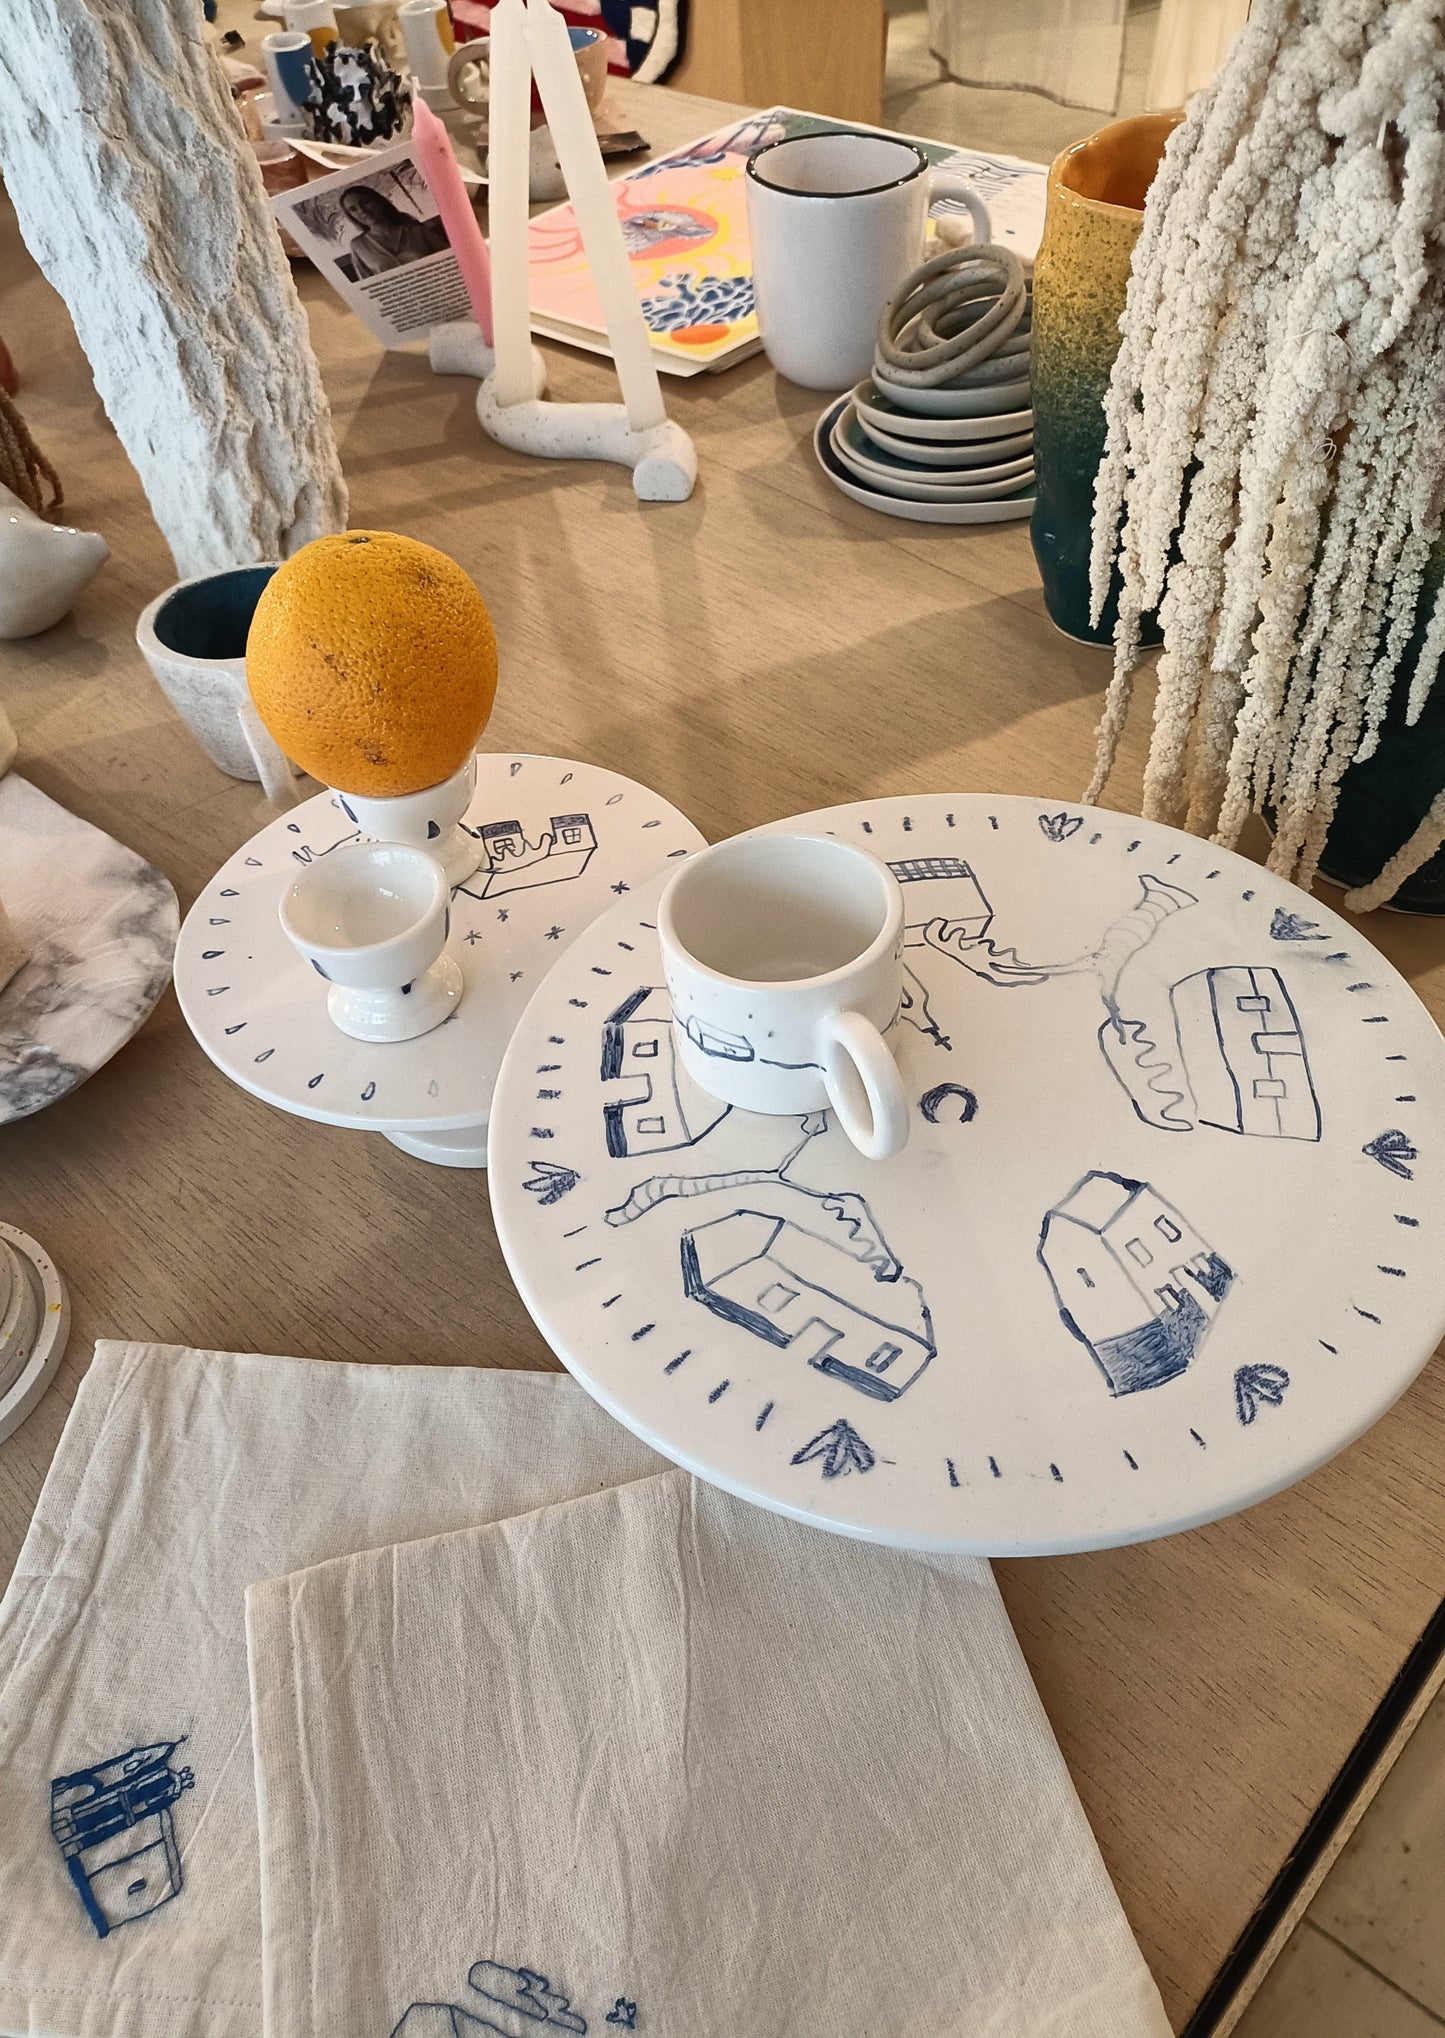 Brunch and Ceramics Workshop with Julia in Lisbon, Portugal by subcultours